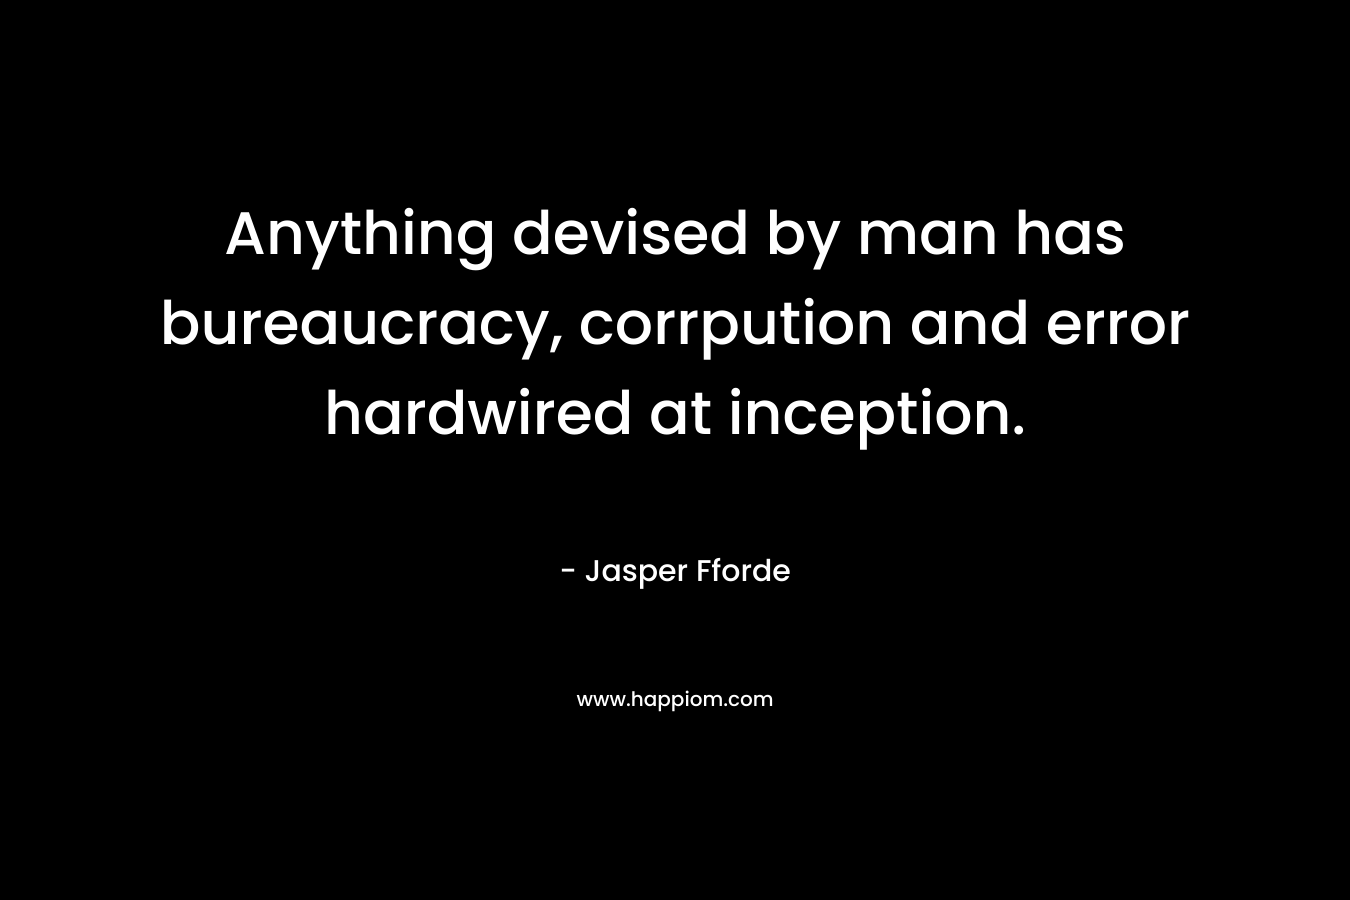 Anything devised by man has bureaucracy, corrpution and error hardwired at inception. – Jasper Fforde